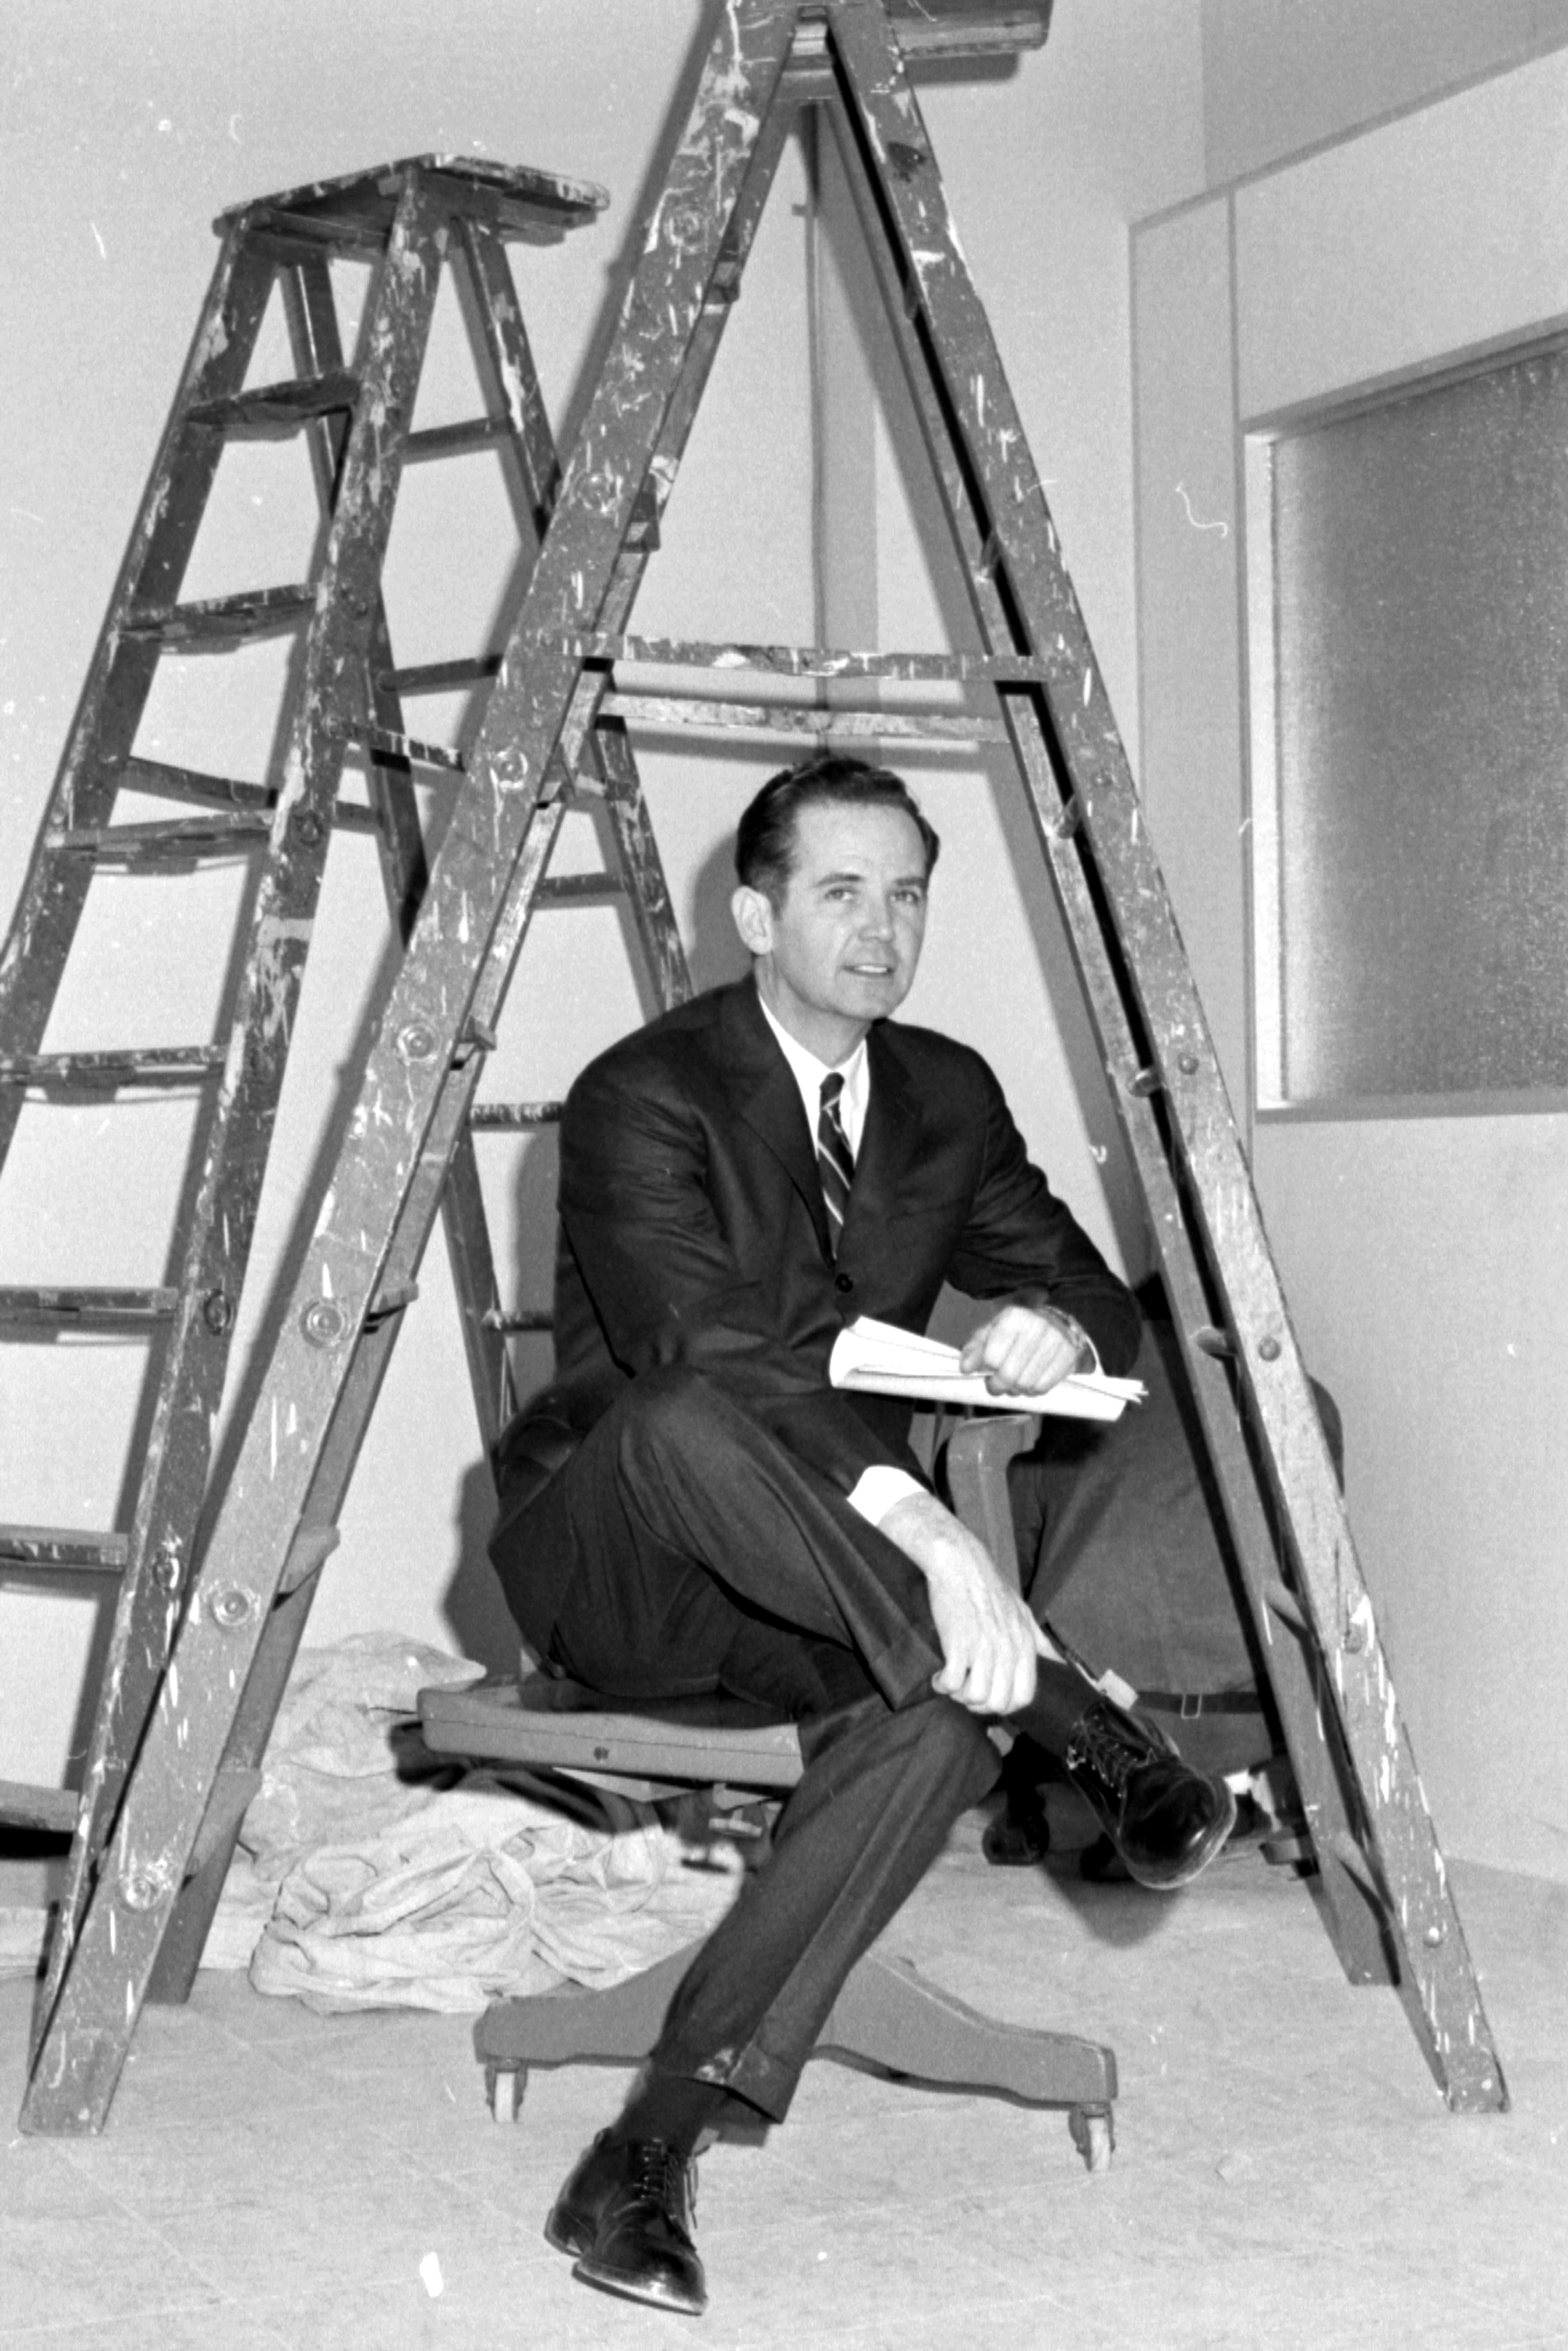 William G. Milliken became Michigan's 44th governor on Jan. 22, 1969. Above, he poses under a ladder at his new Detroit office on Feb. 18.